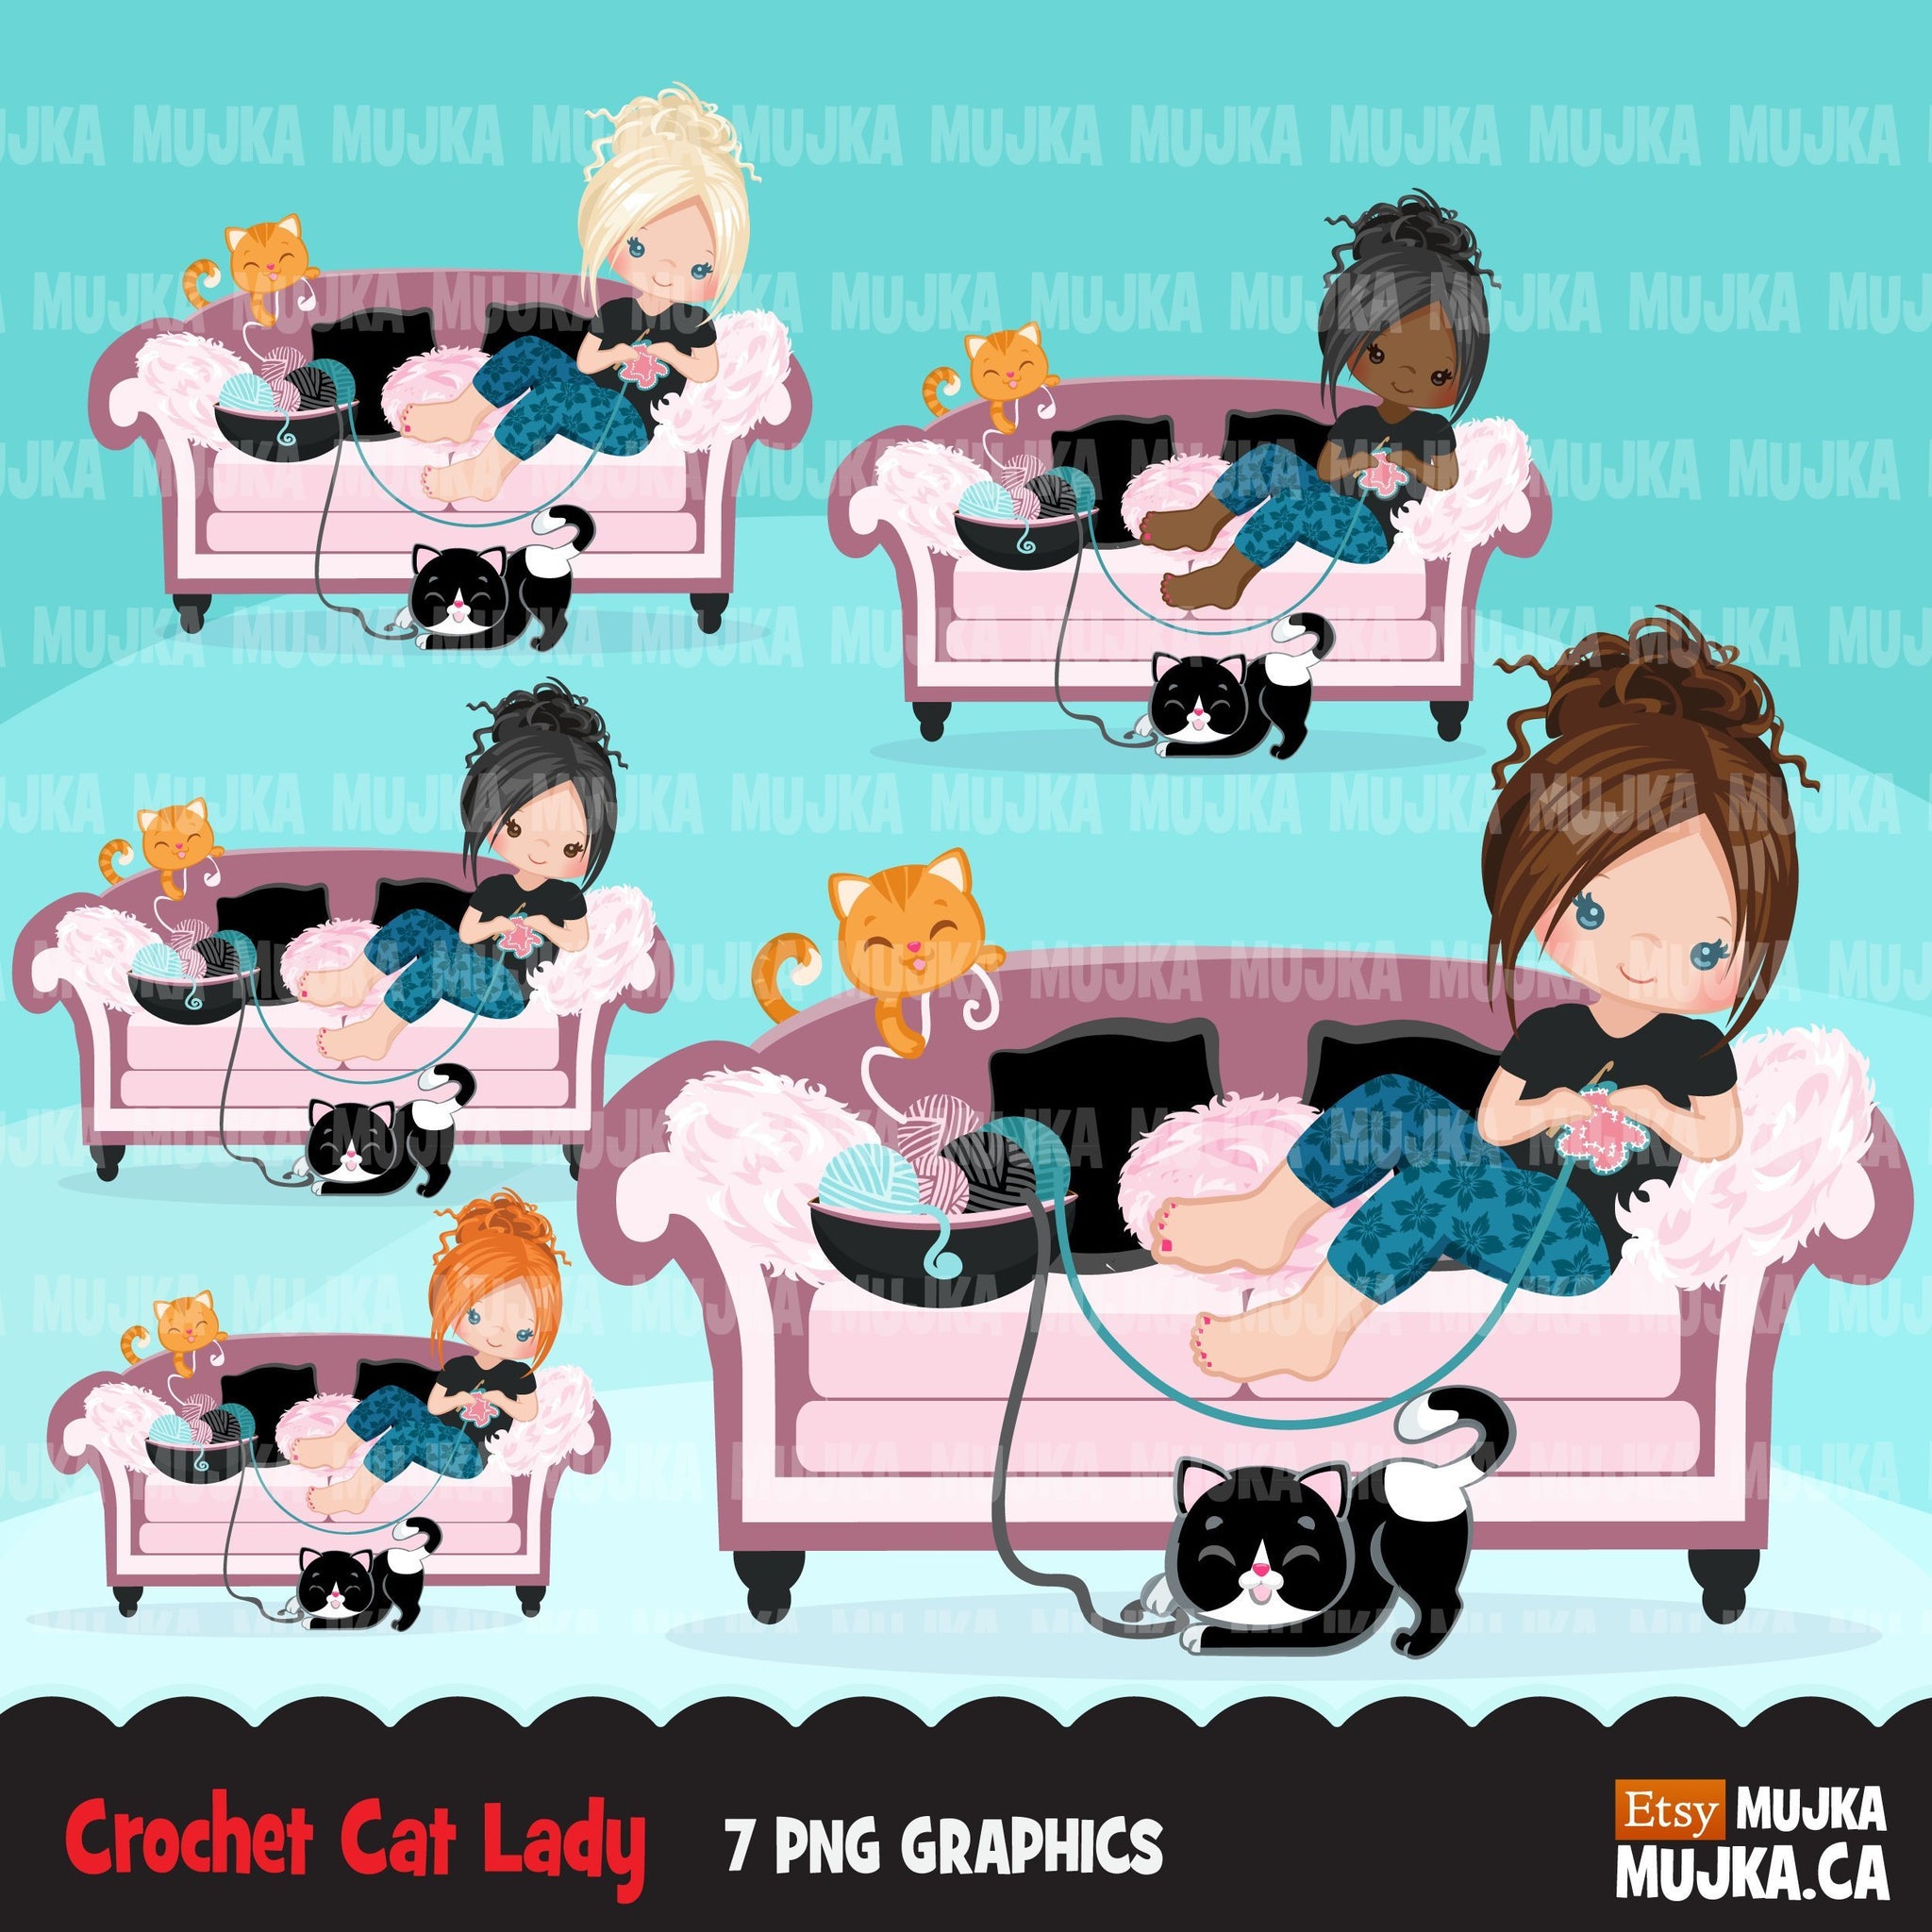 Crochet cat lady, Crafty character clipart graphics, animal, girl